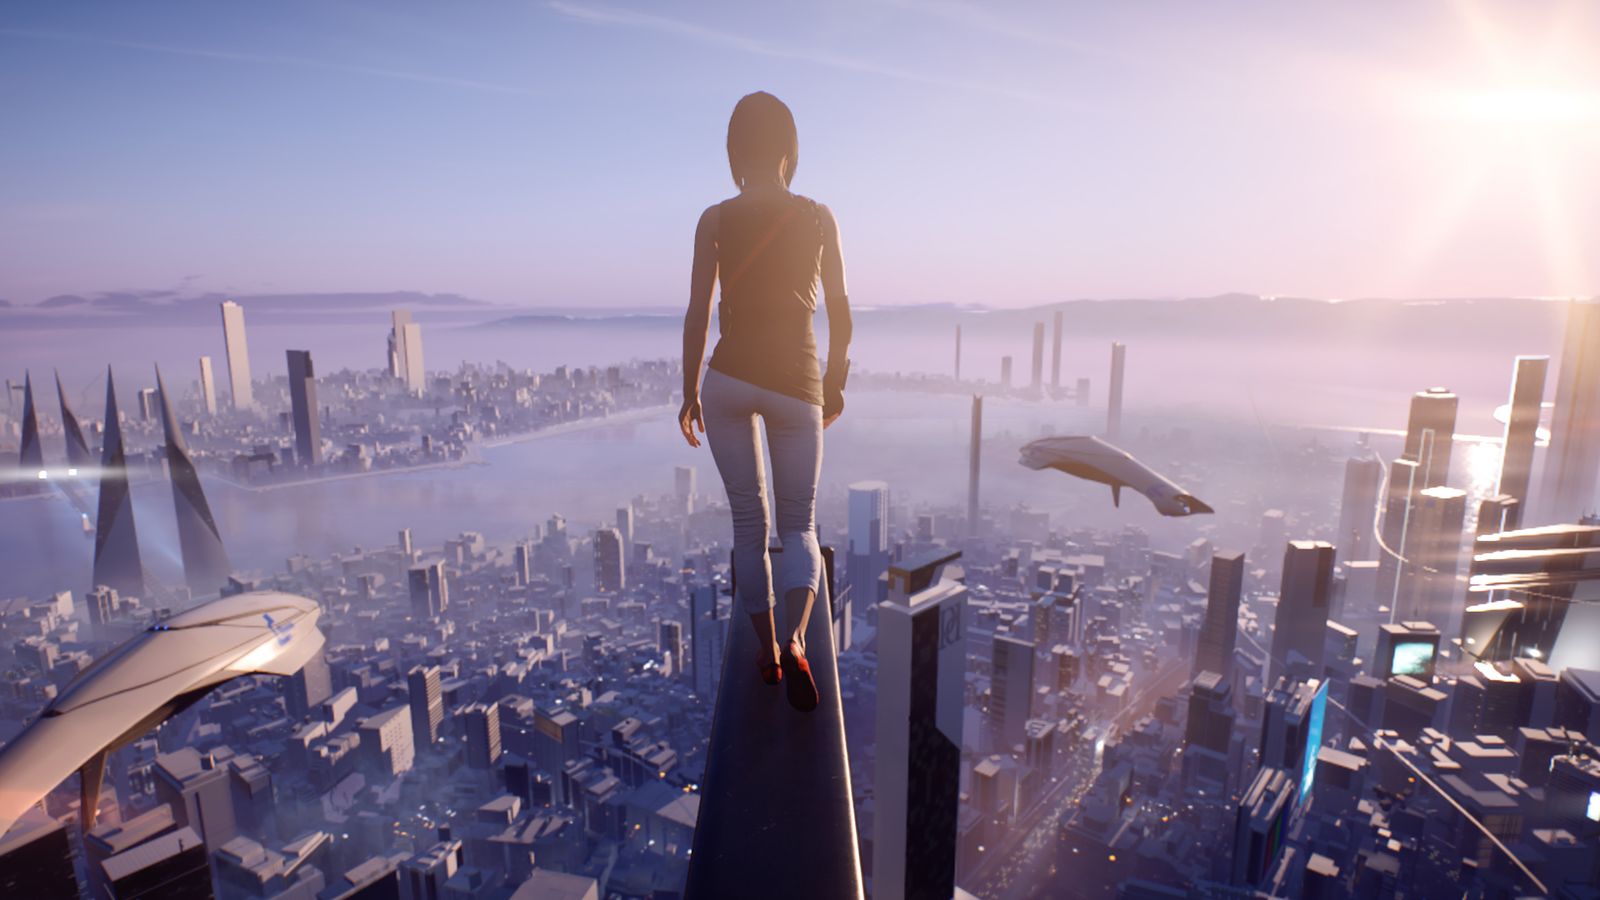 Enter a dystopian Mirrors Edge society where citizen rights are limited to  the very core, and only the most agile can avoid total control! Visit  Eneba!